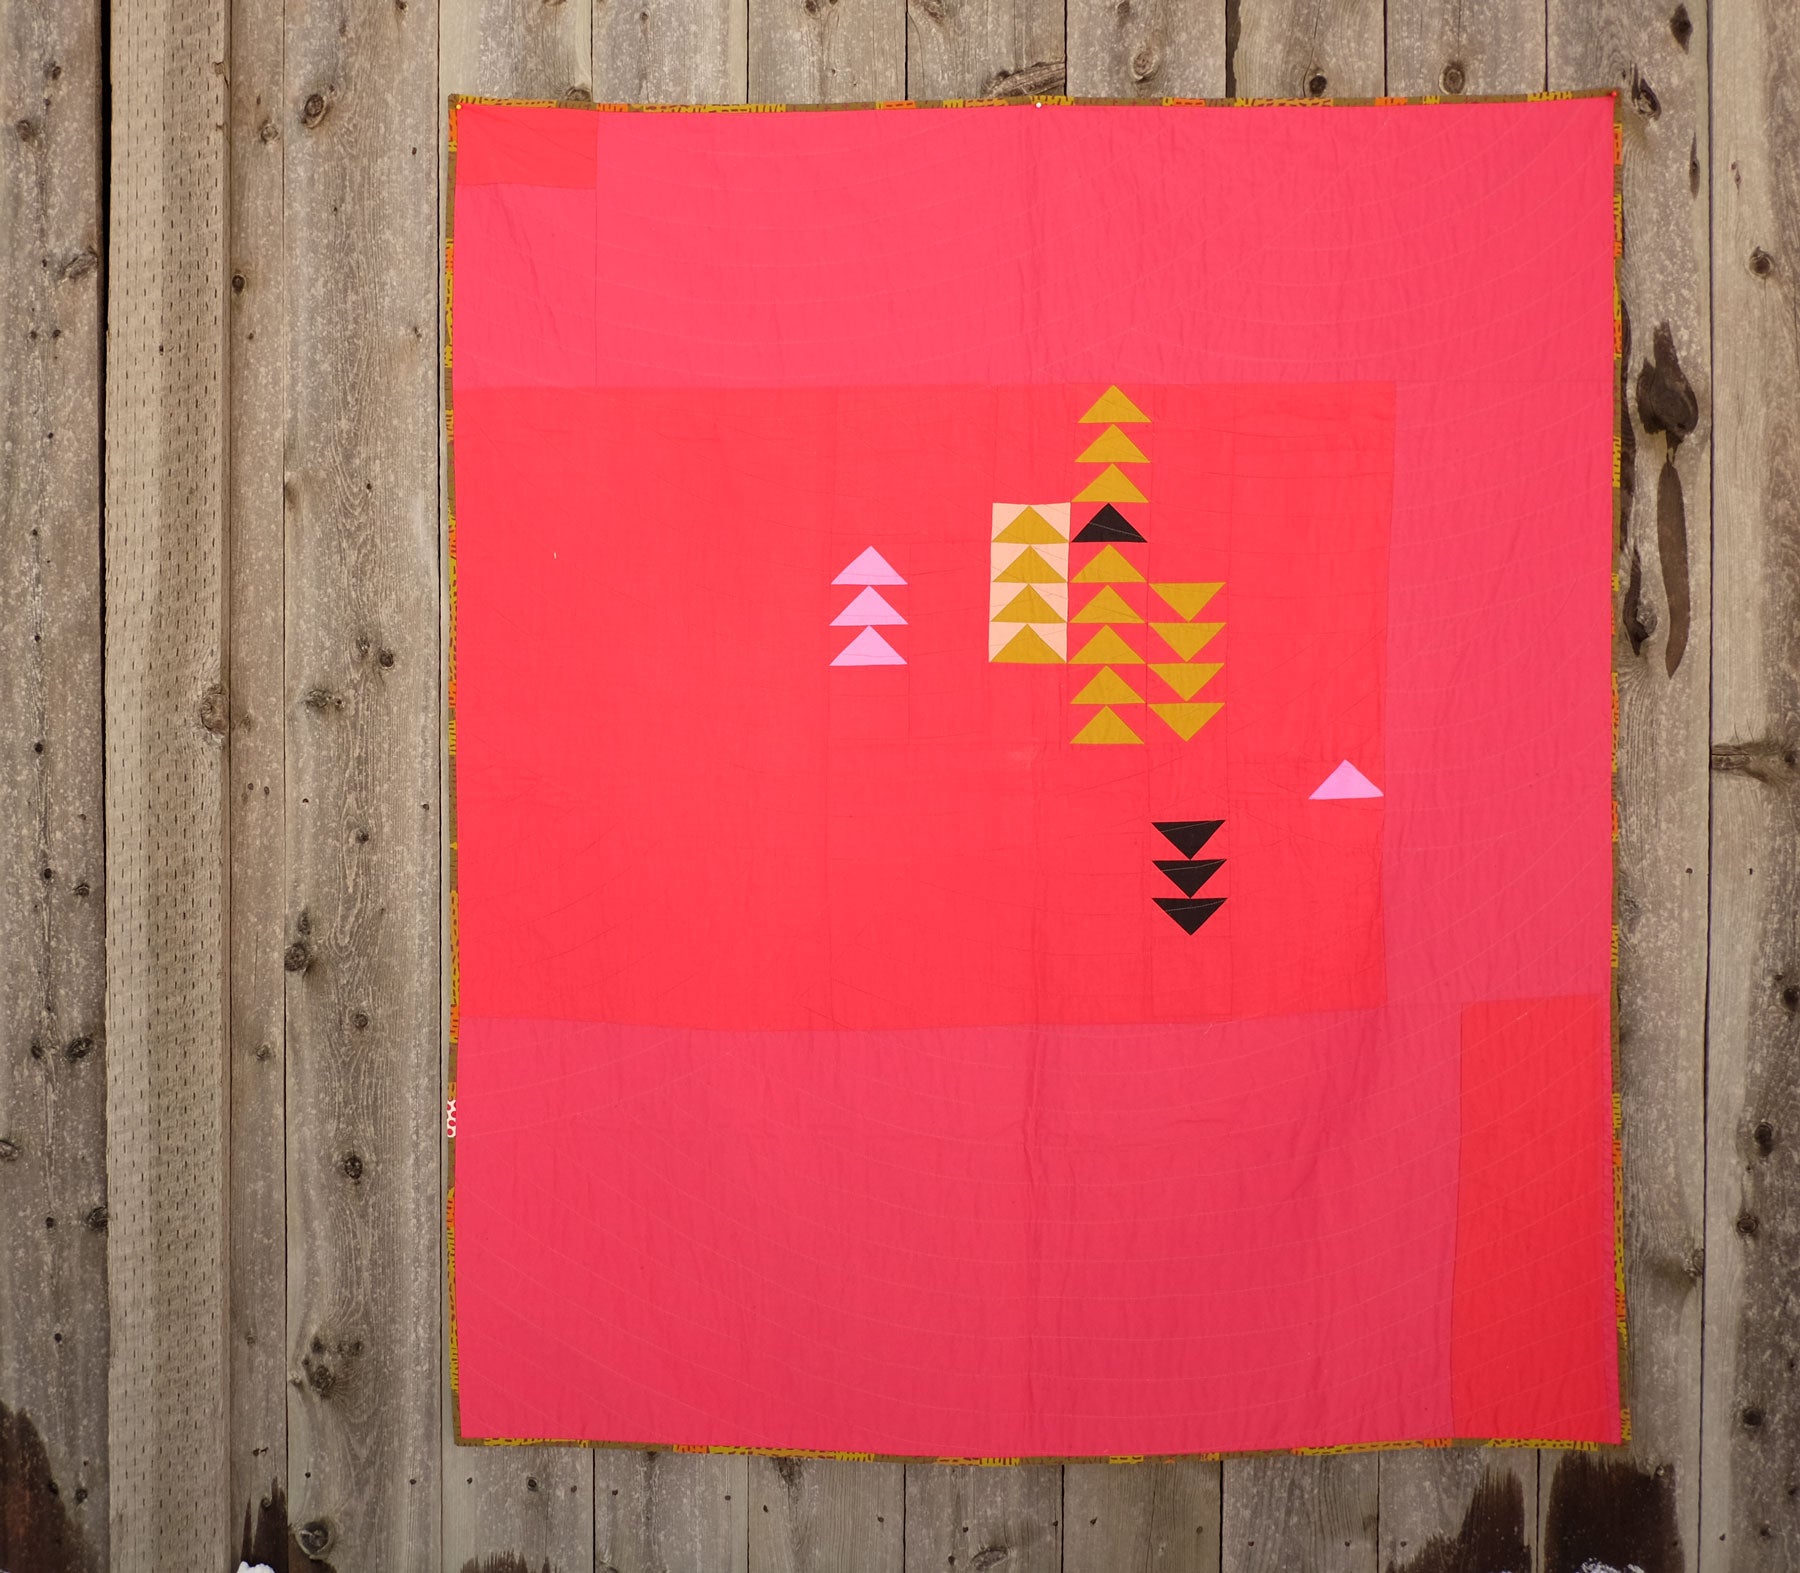 Shawna Doering's Red Hot Quilt hanging on a fence